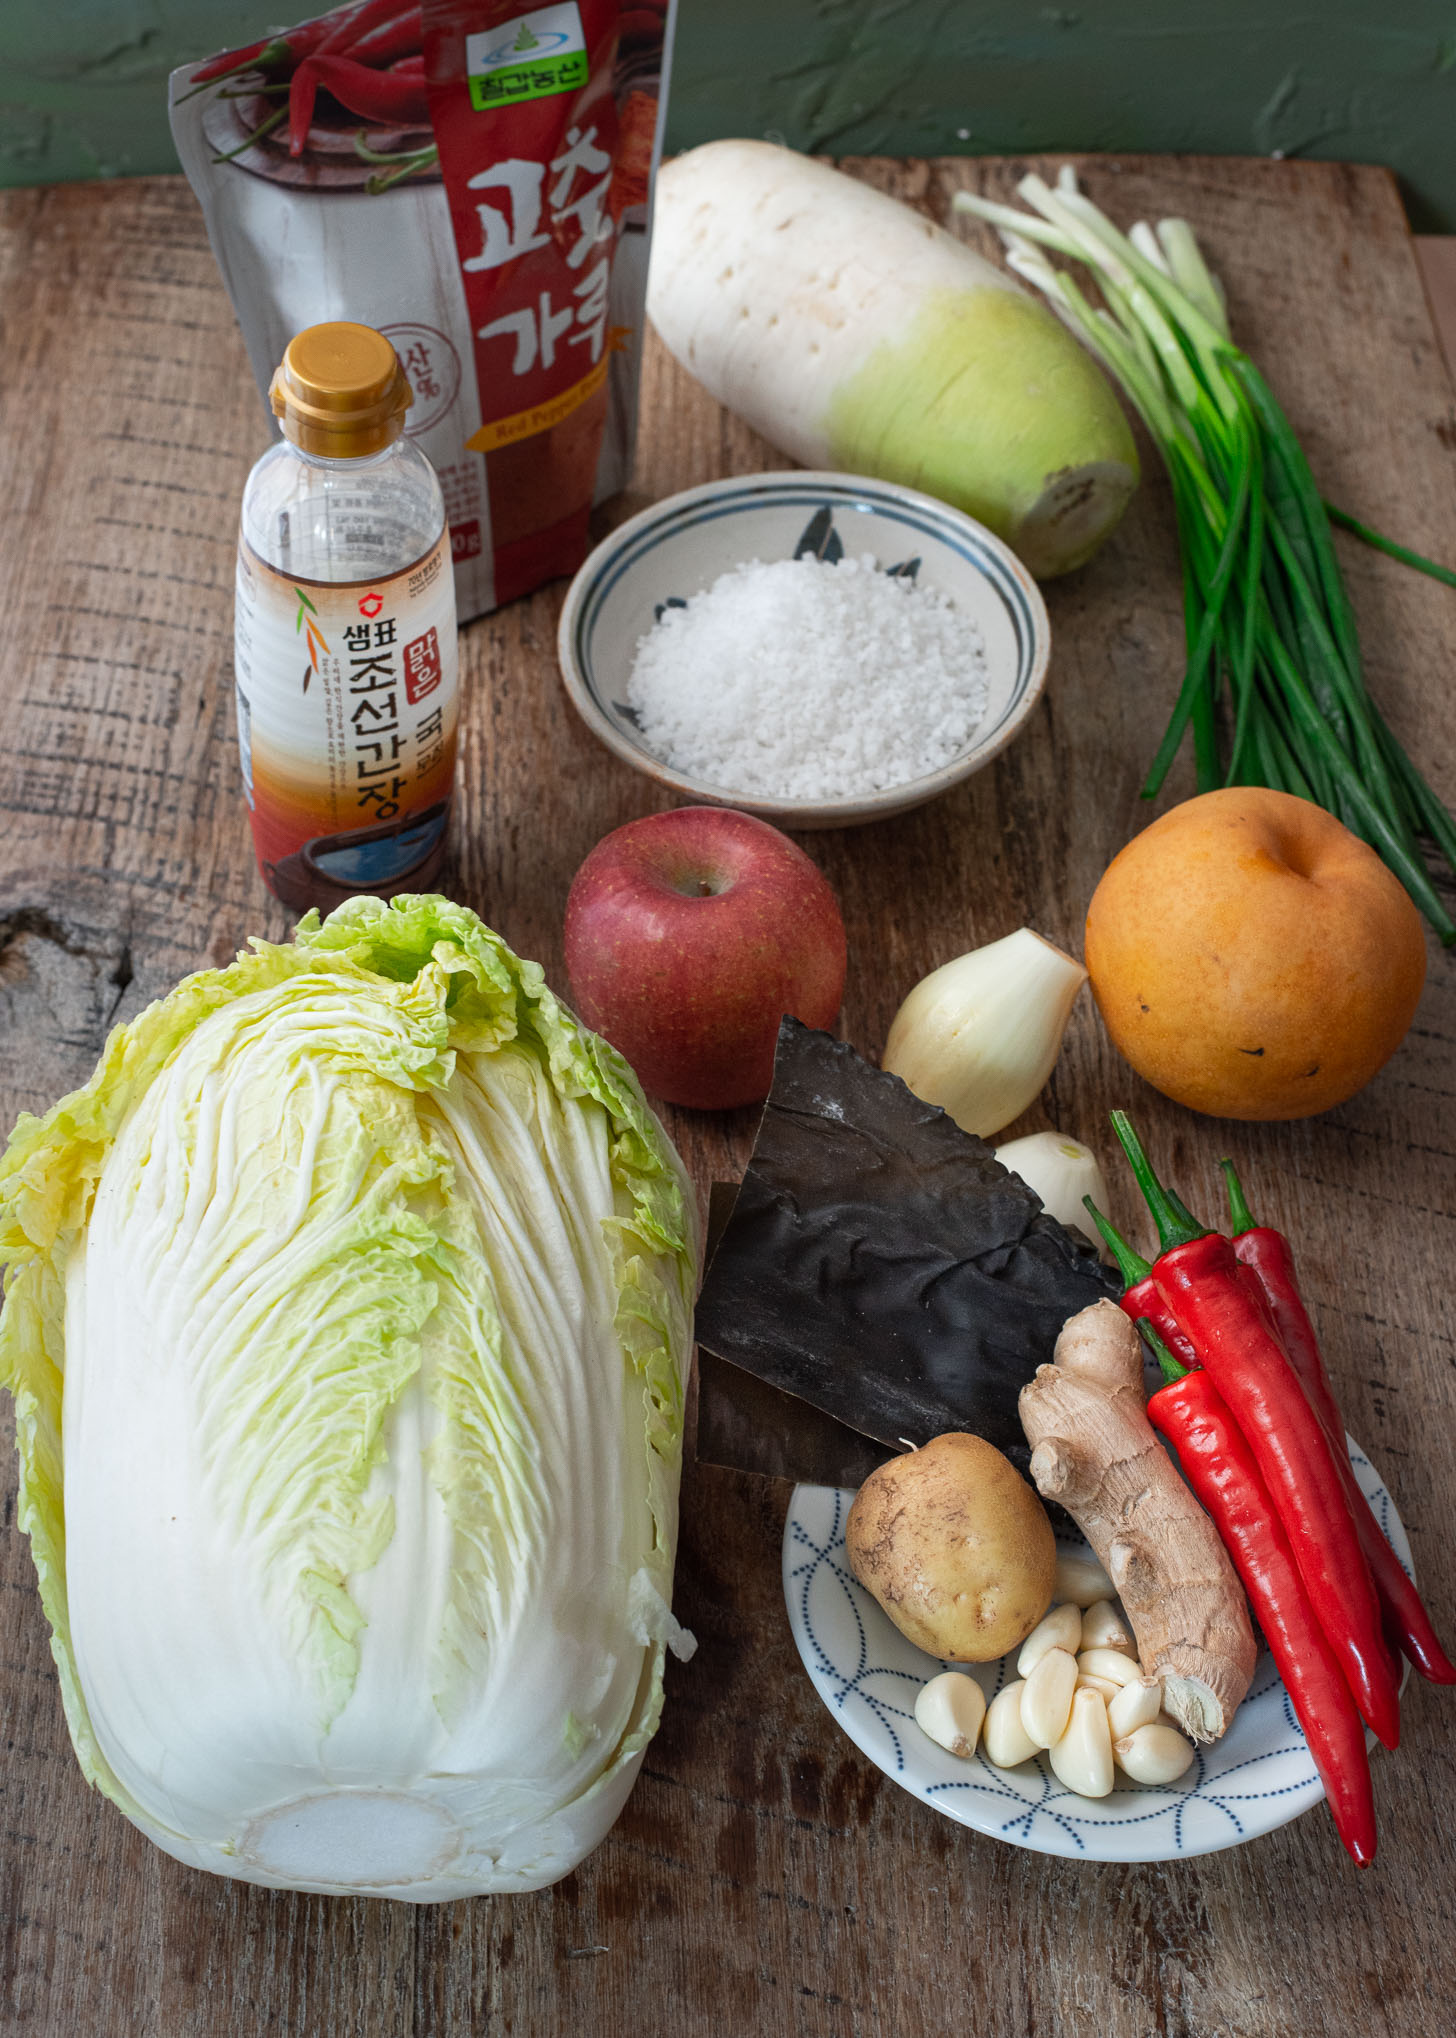 Ingredients for making vegan kimchi are presented.